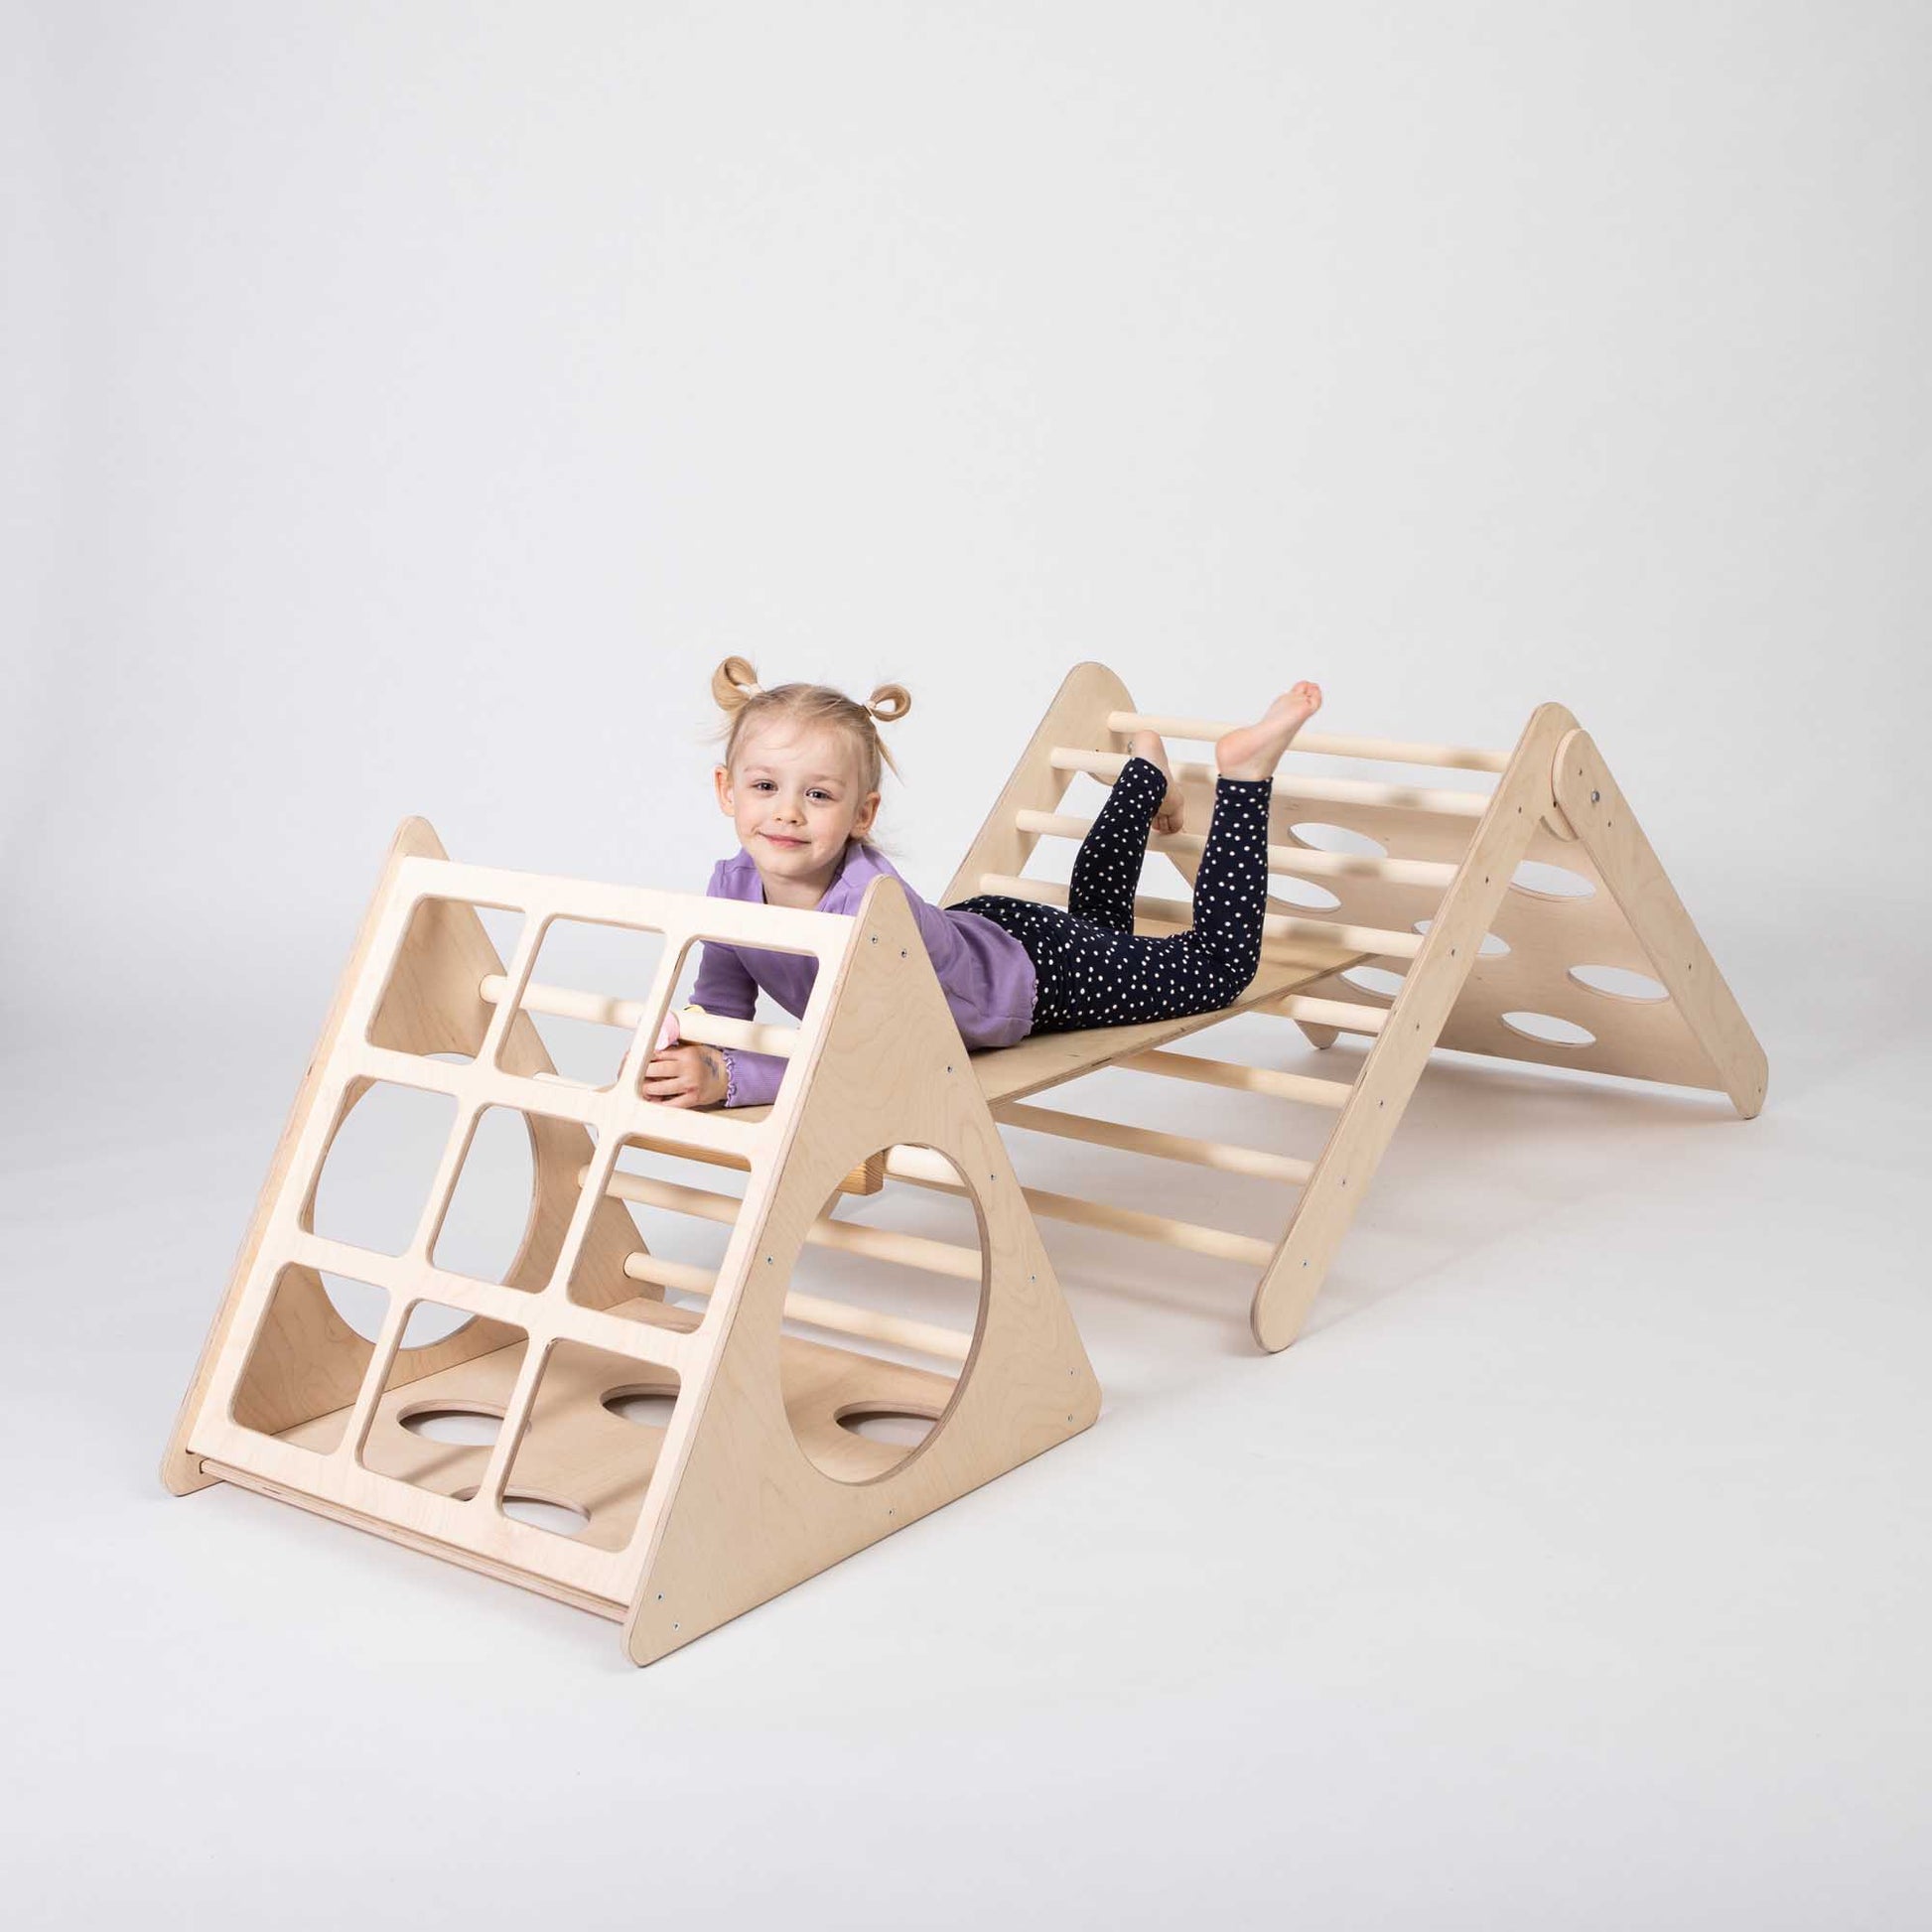 A girl joyfully playing on a Montessori climber set, featuring two distinct triangle climbers and an accompanying ramp, providing a diverse and engaging play environment for children.